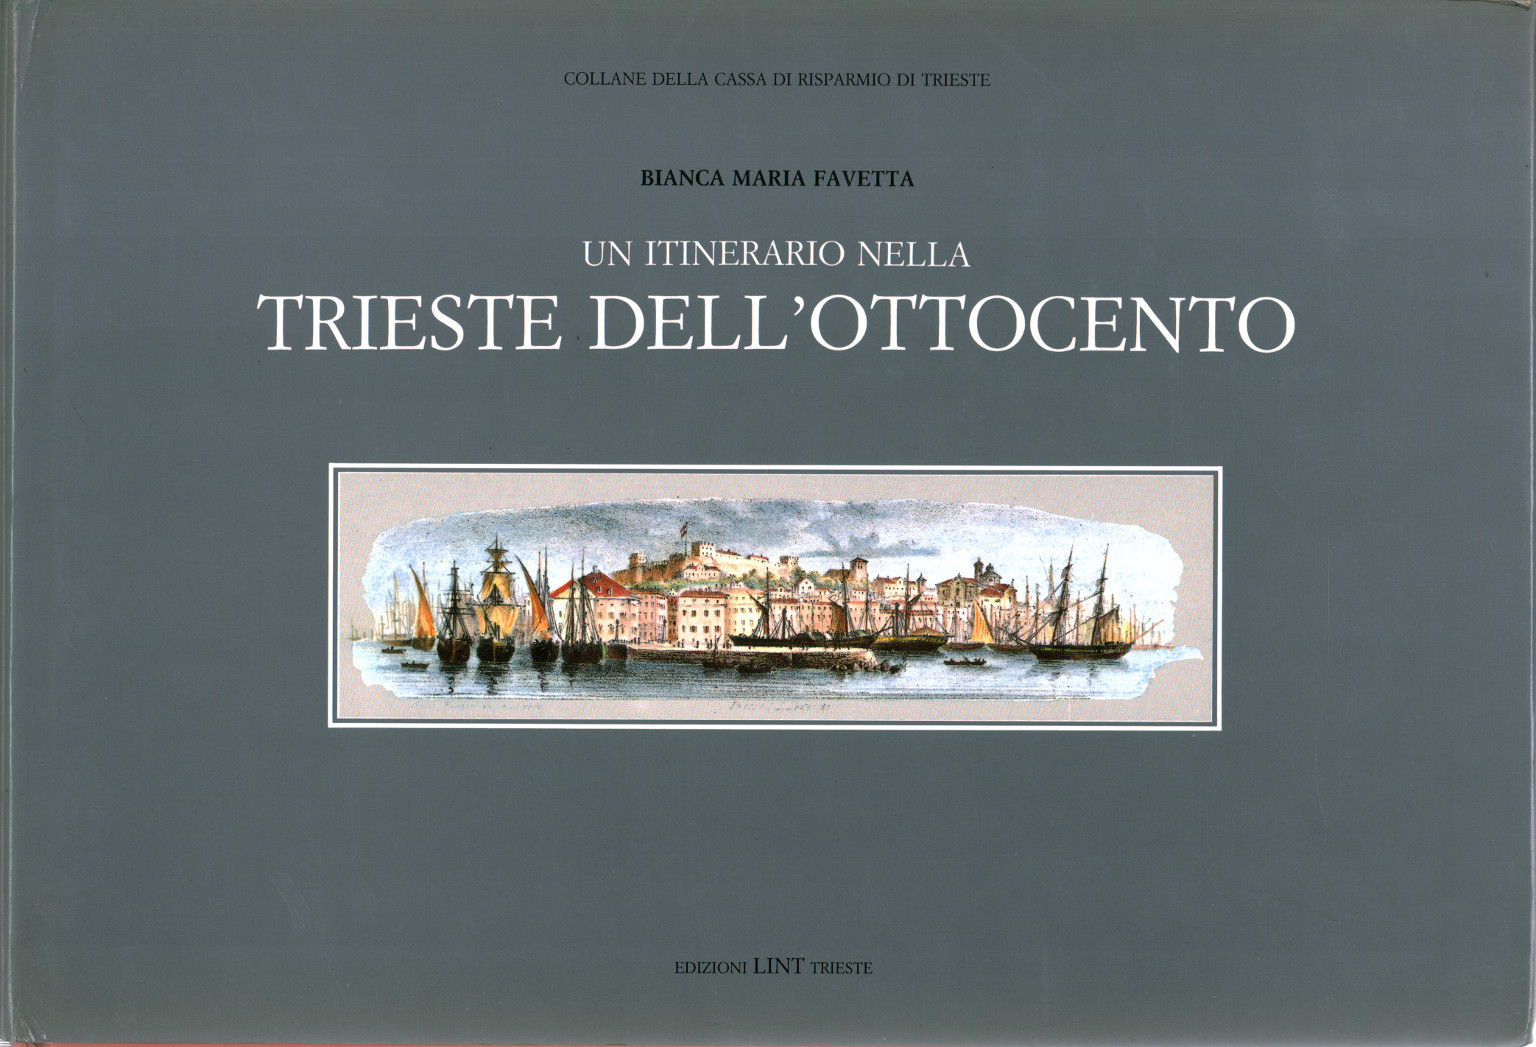 An itinerary in the Trieste of the nineteenth century, s.a.